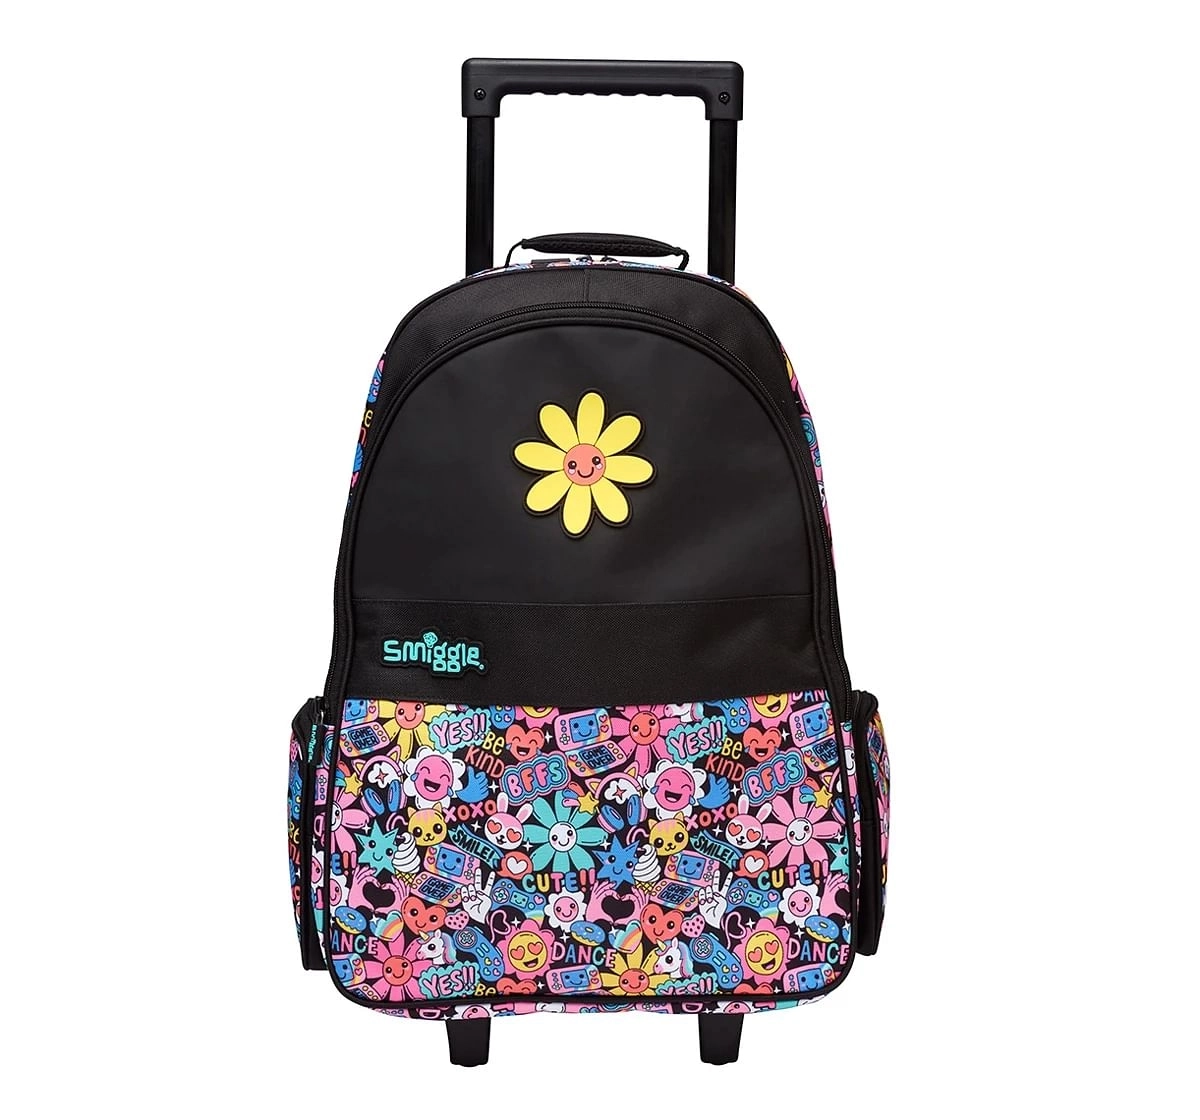 Smiggle Bright Side Trolley With Light Up Wheels for Kids 3Y+, Black